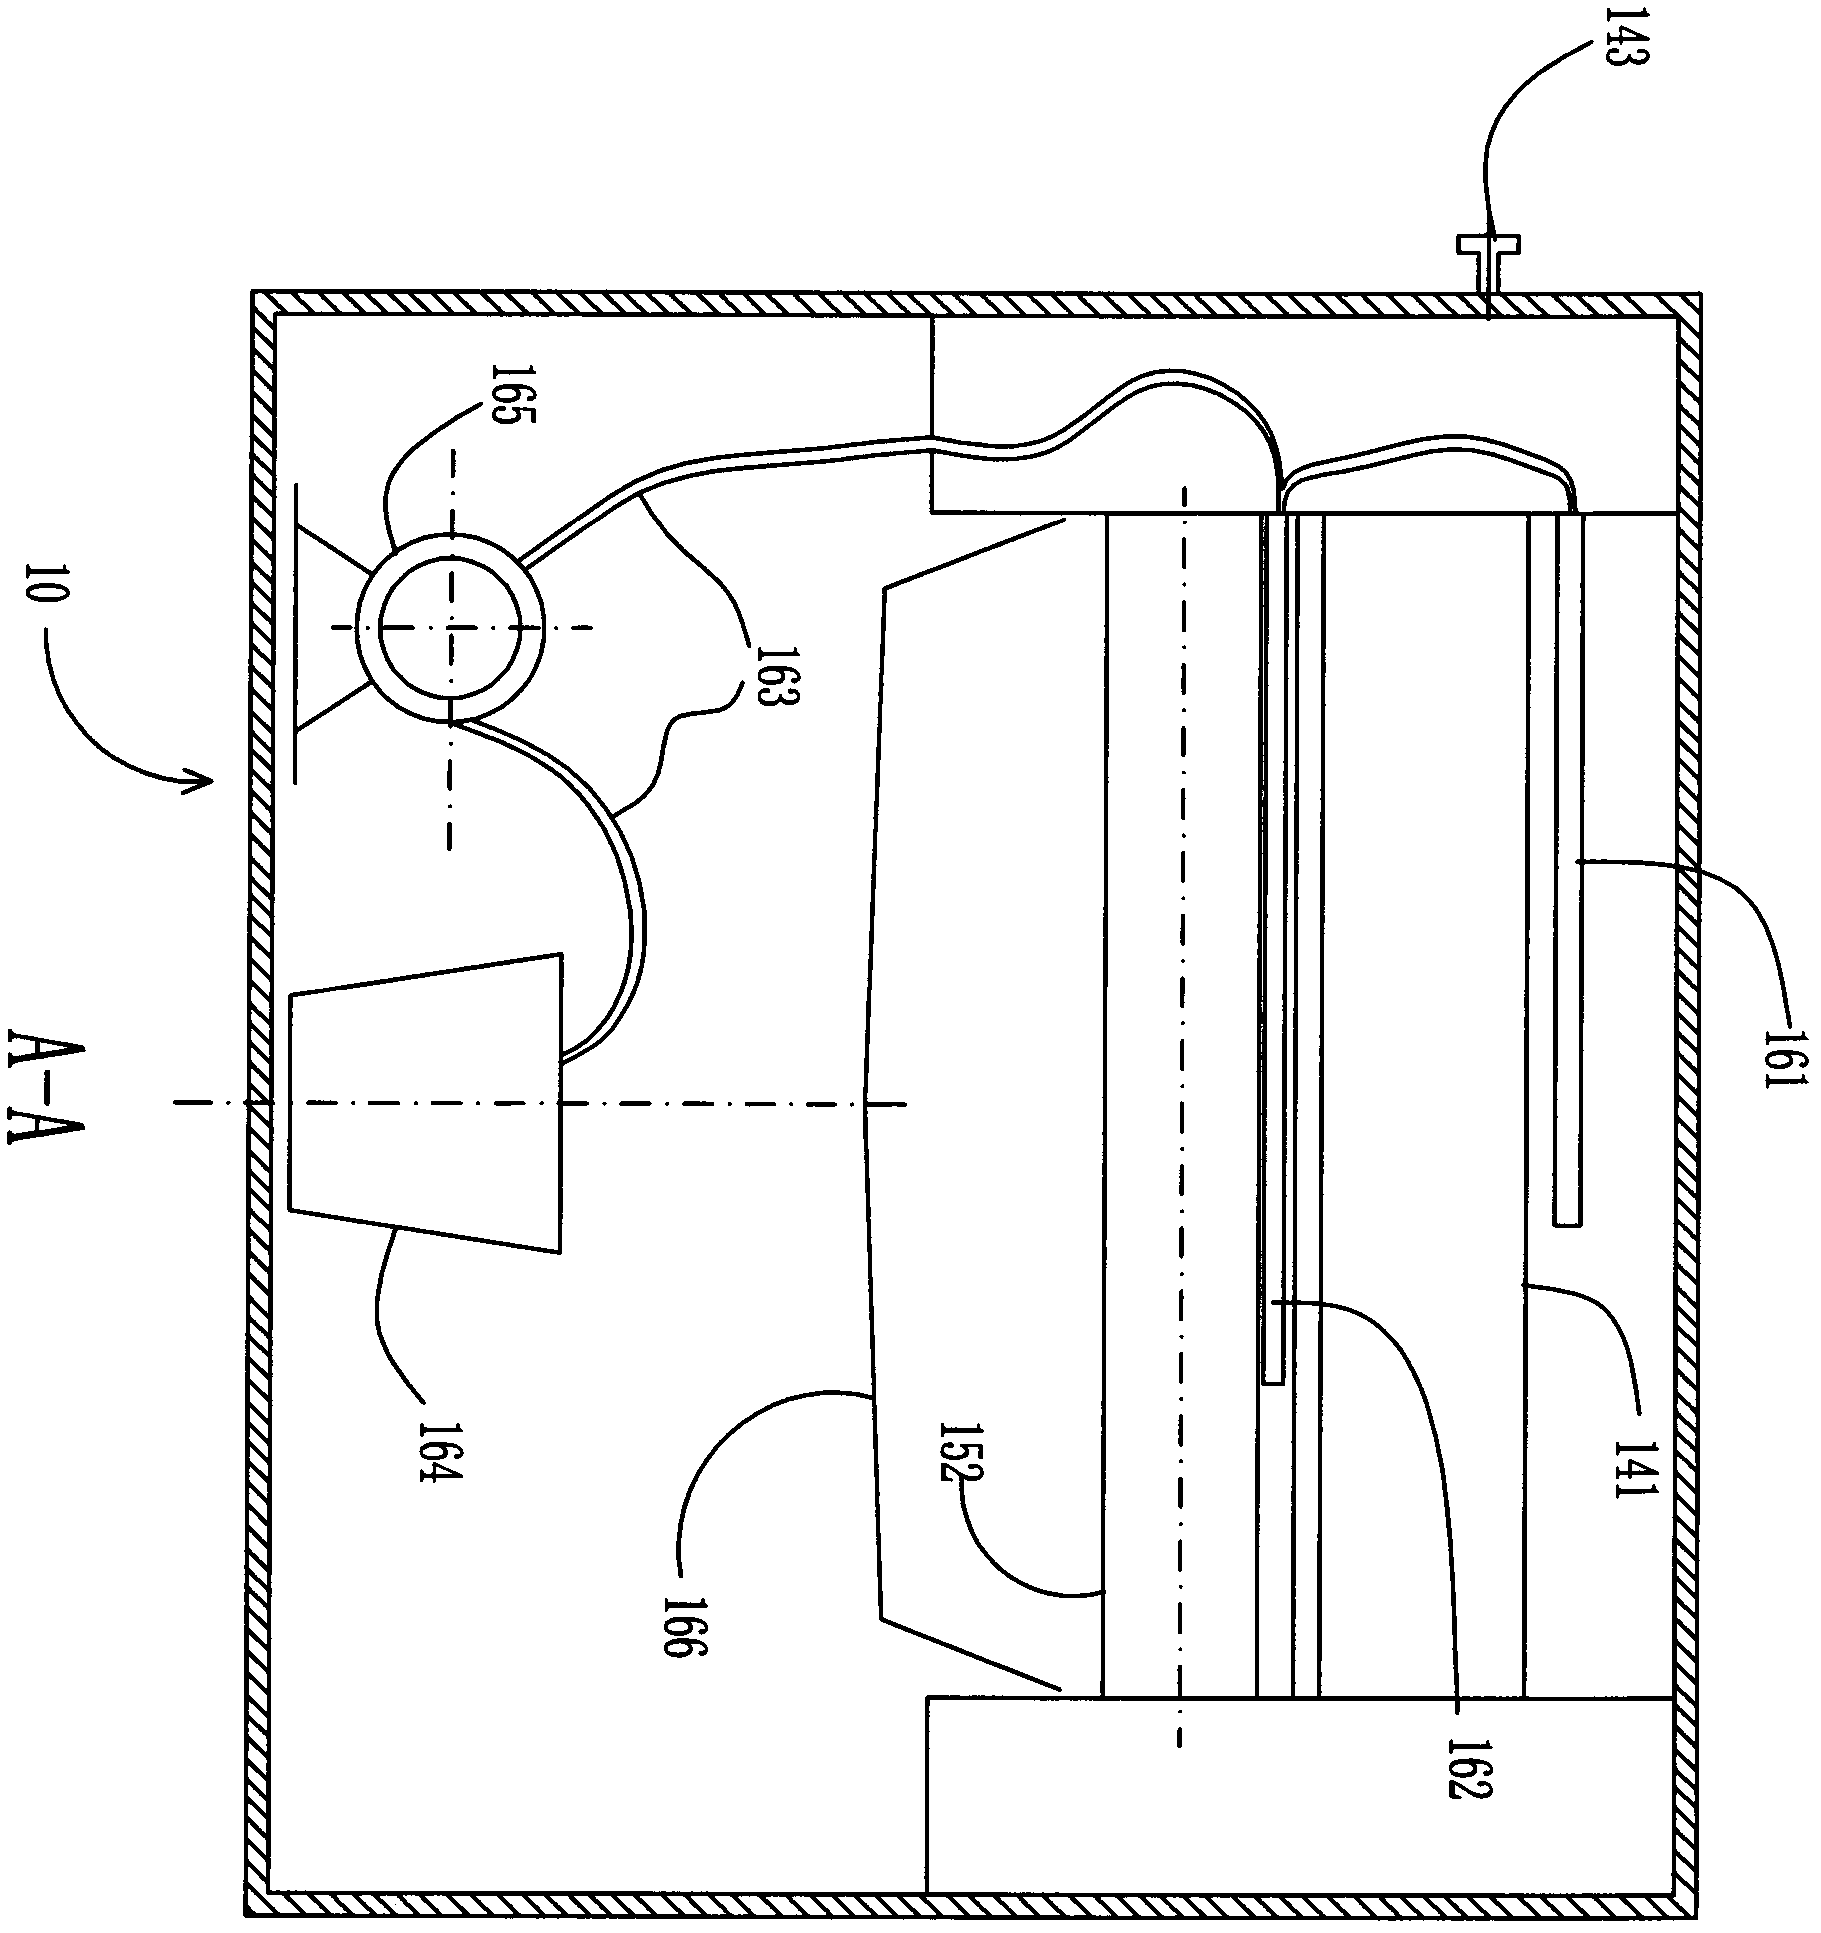 Printed circuit board solder resist ink coating technology and coating apparatus